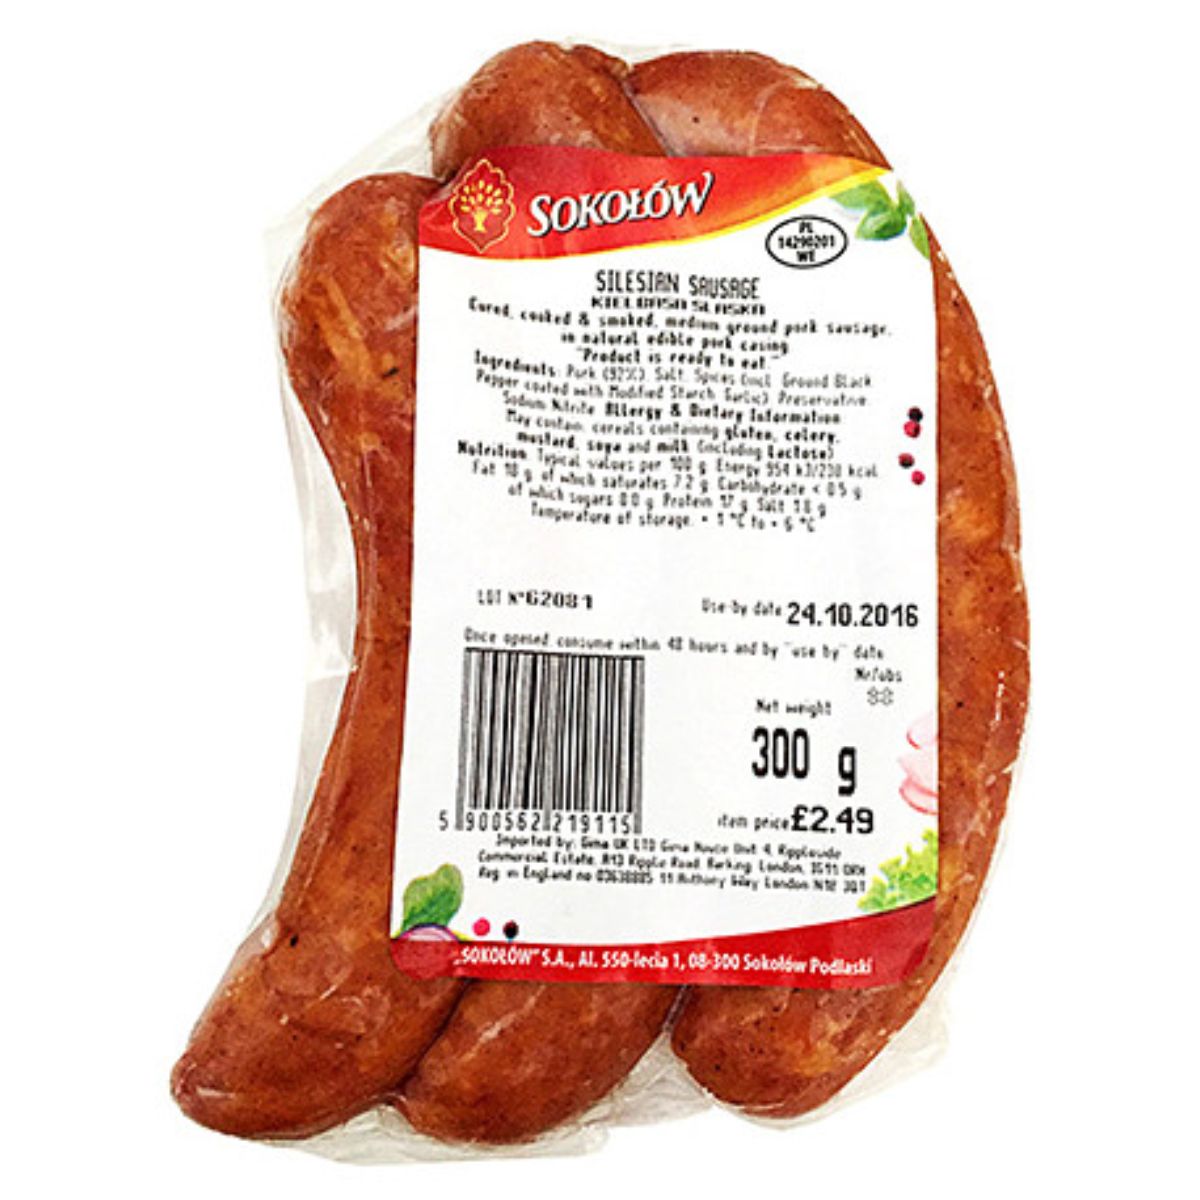 Sokolow - Silesian Sausage - 300g (Varies) in a package on a white background.